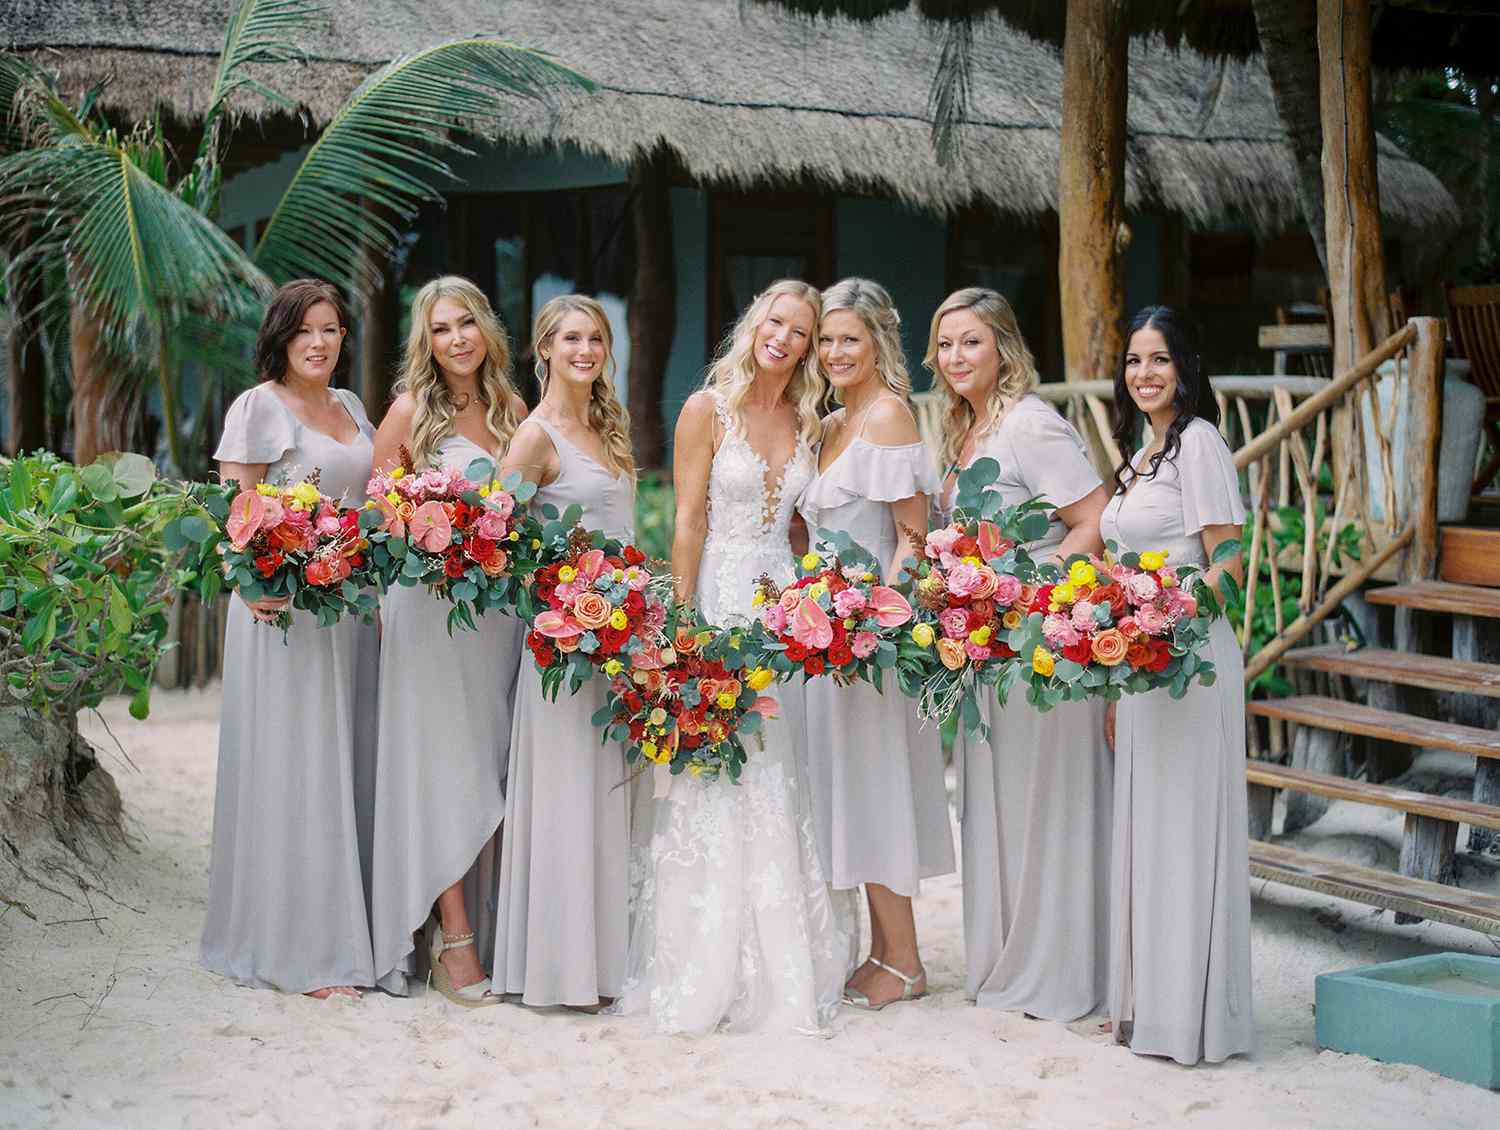 bride and bridesmaids in light gray holding red and yellow bouquets